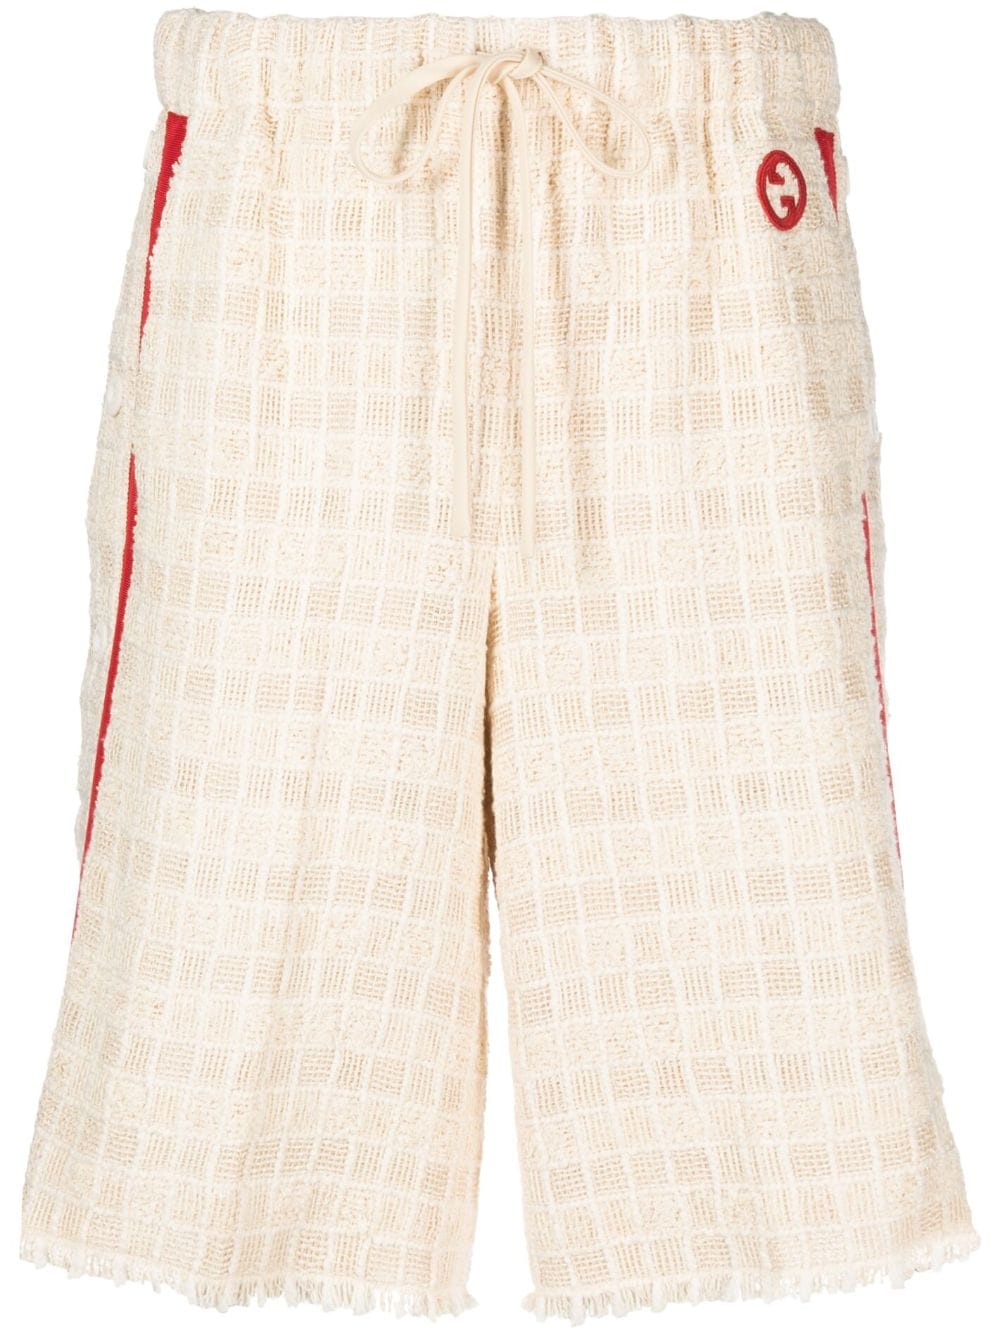 Elegant Ivory Cotton Bermuda Shorts from GUCCI for Women - FW23 Collection